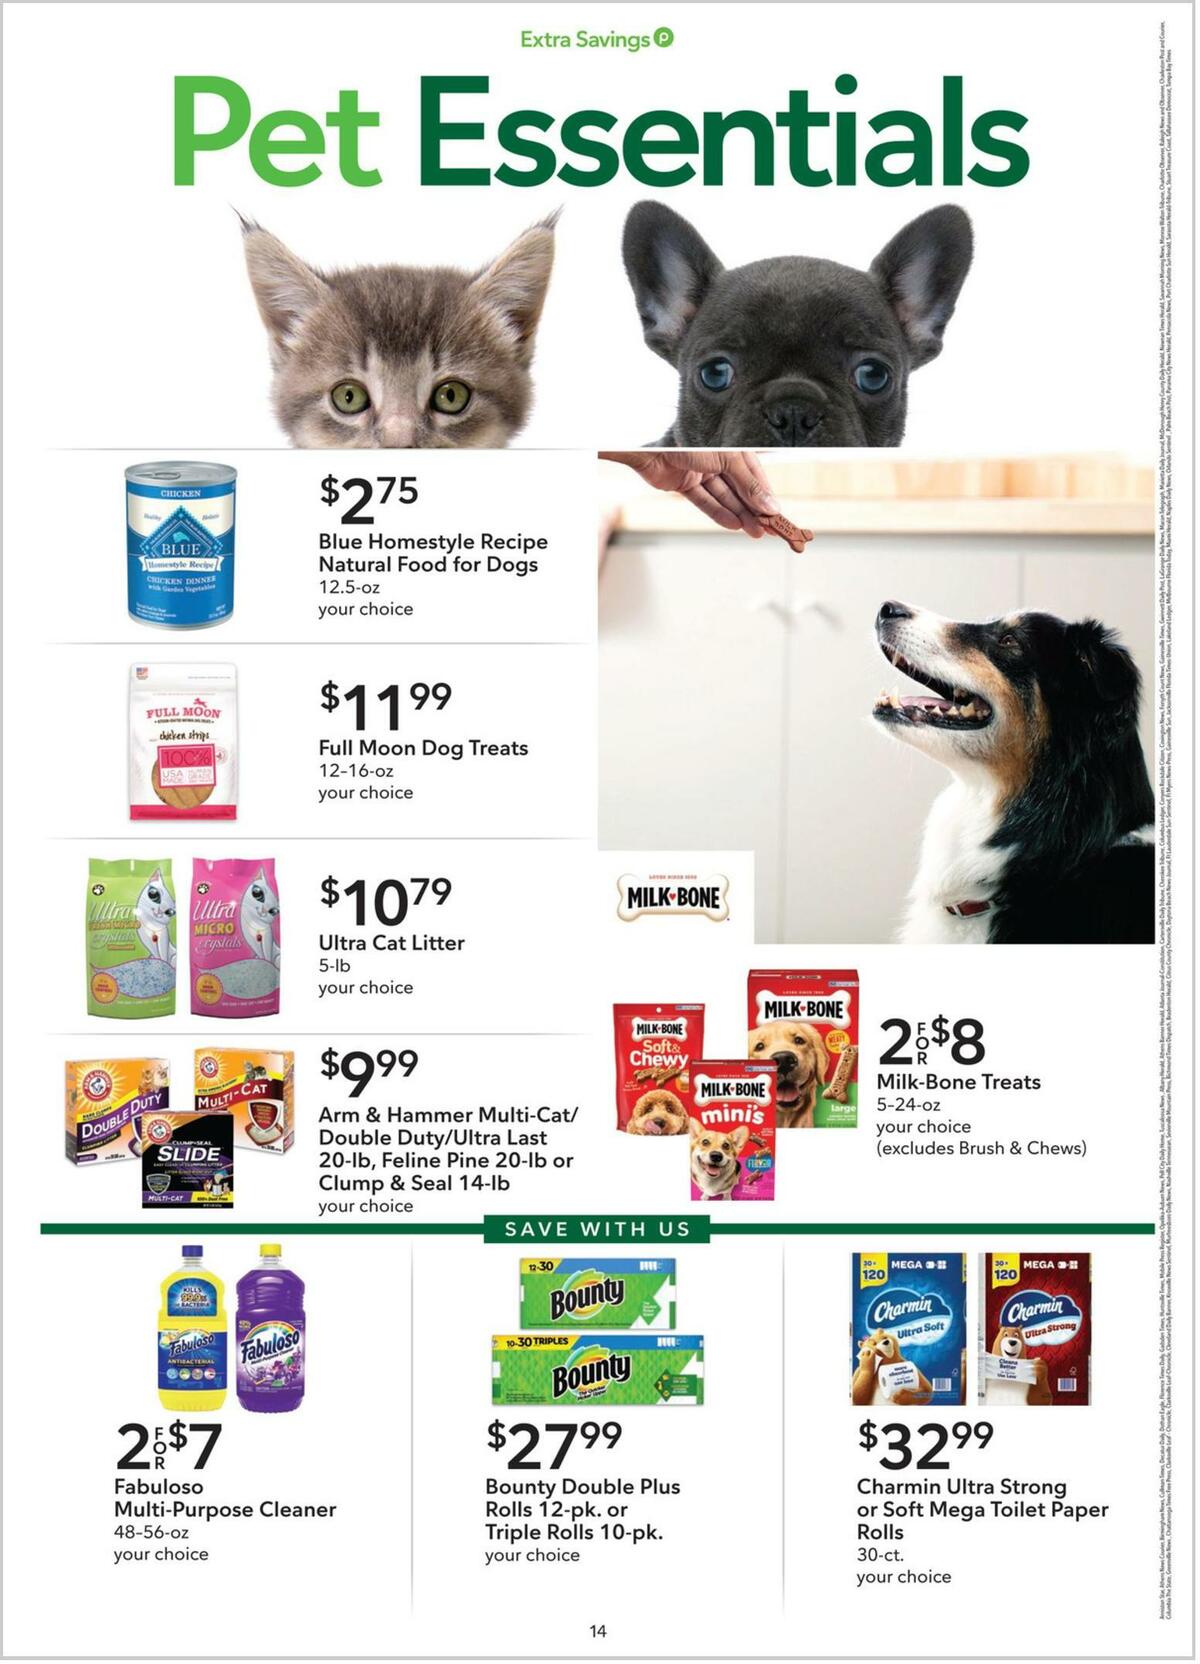 Publix Extra Savings Weekly Ad from December 3